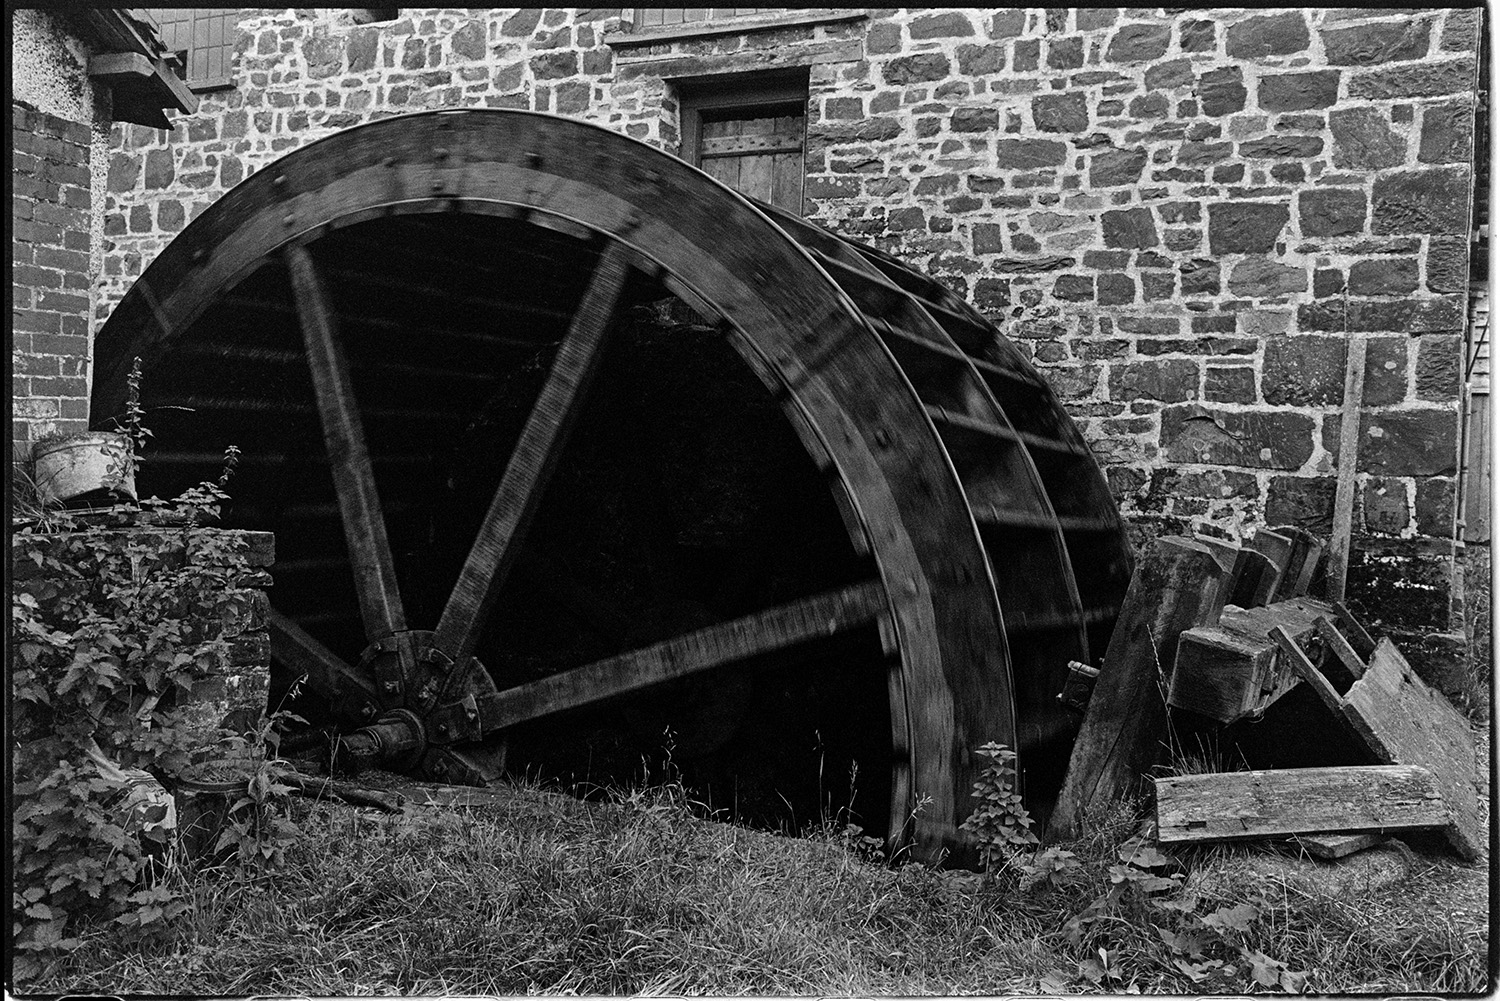 Mill wheel. 
[A wooden water wheel by the stone mill building at Head mill, Kings Nympton.]